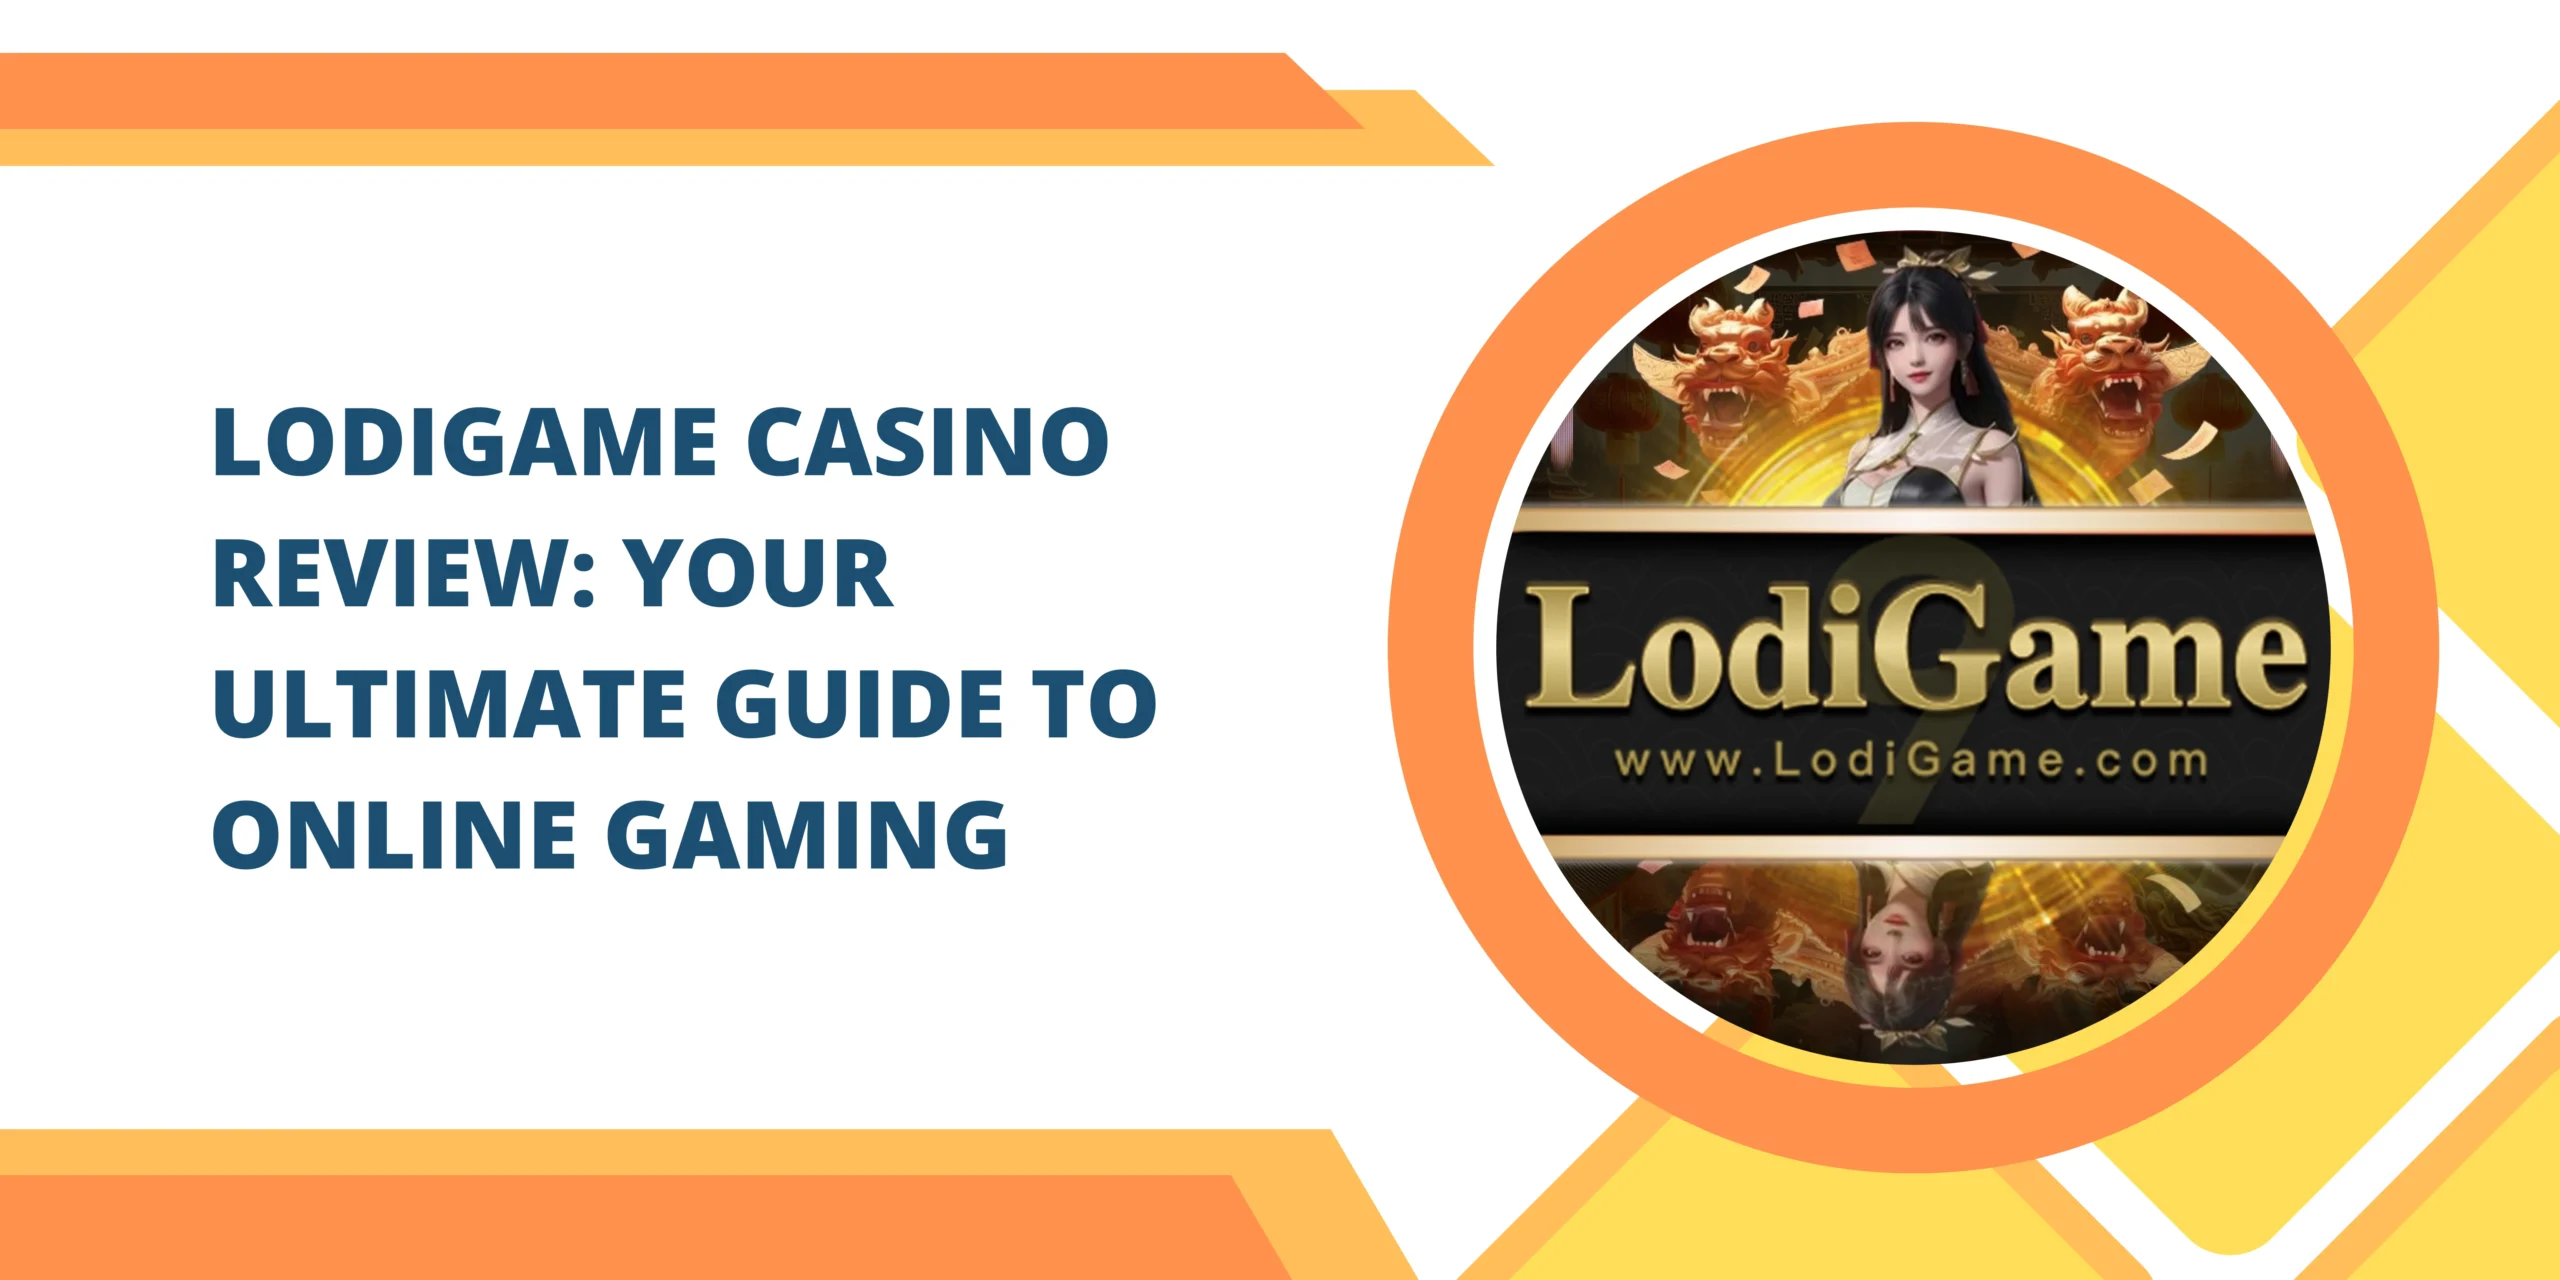 Lodigame Casino Review: Your Ultimate Guide to Online Gaming